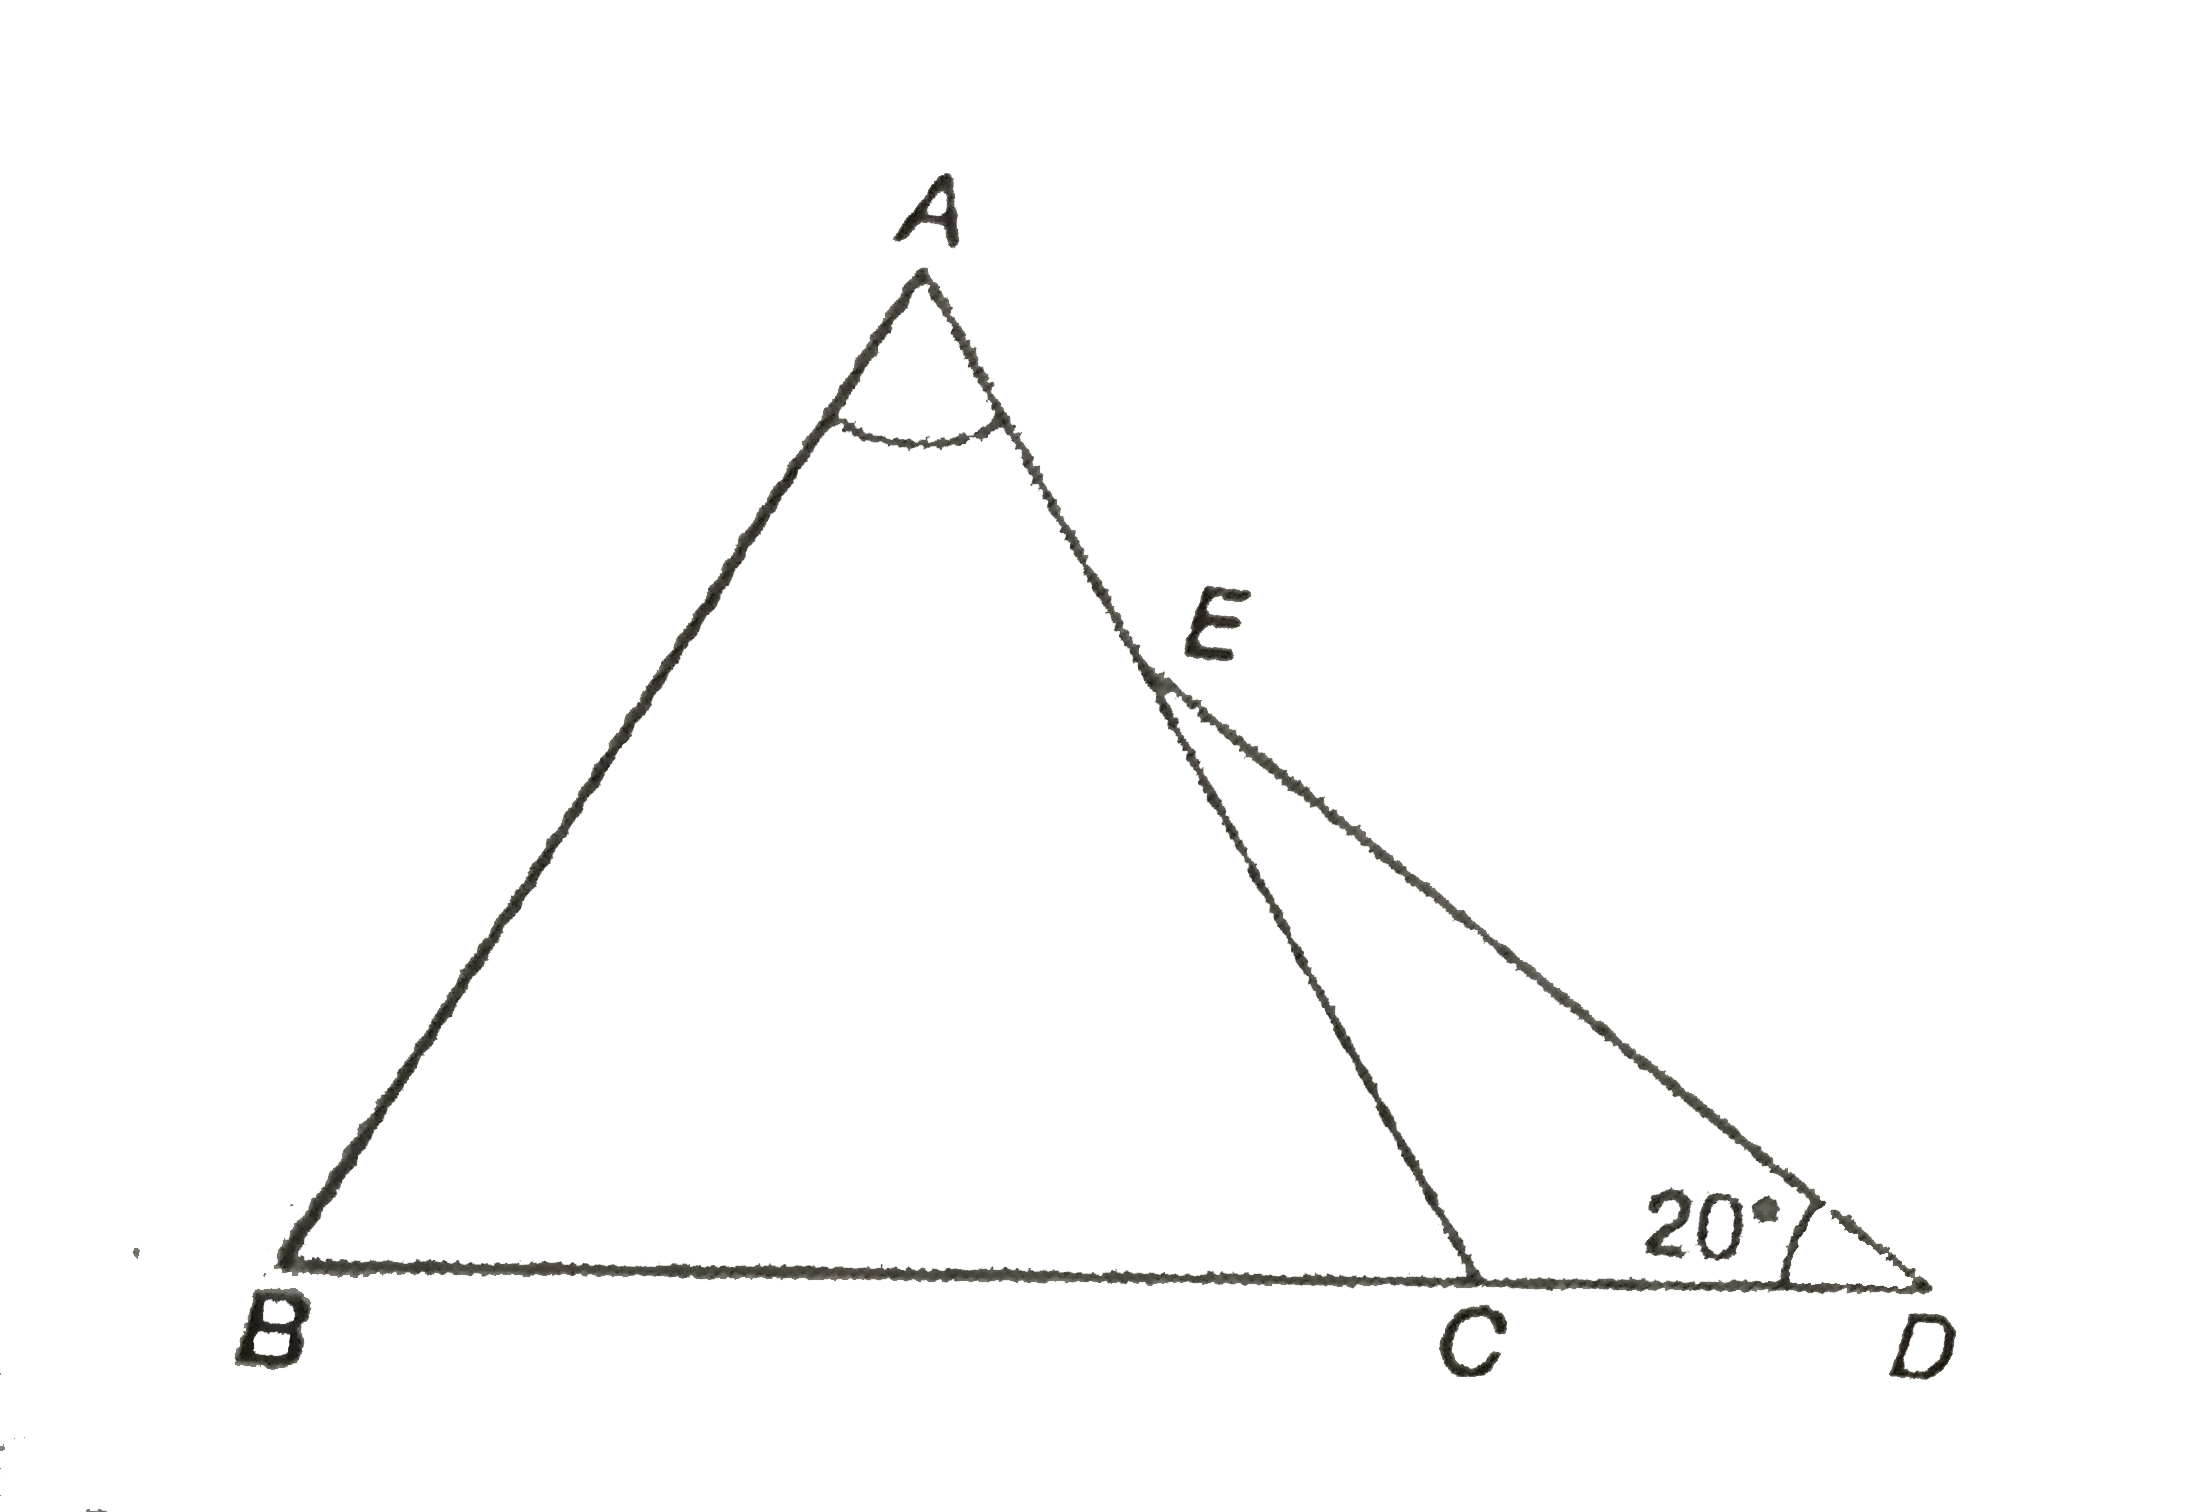 In the figure, AB = AC and BC is procured to D, if angleCDE=20^(@) and angleBAC=80^(@), then find the angle of angleCED.